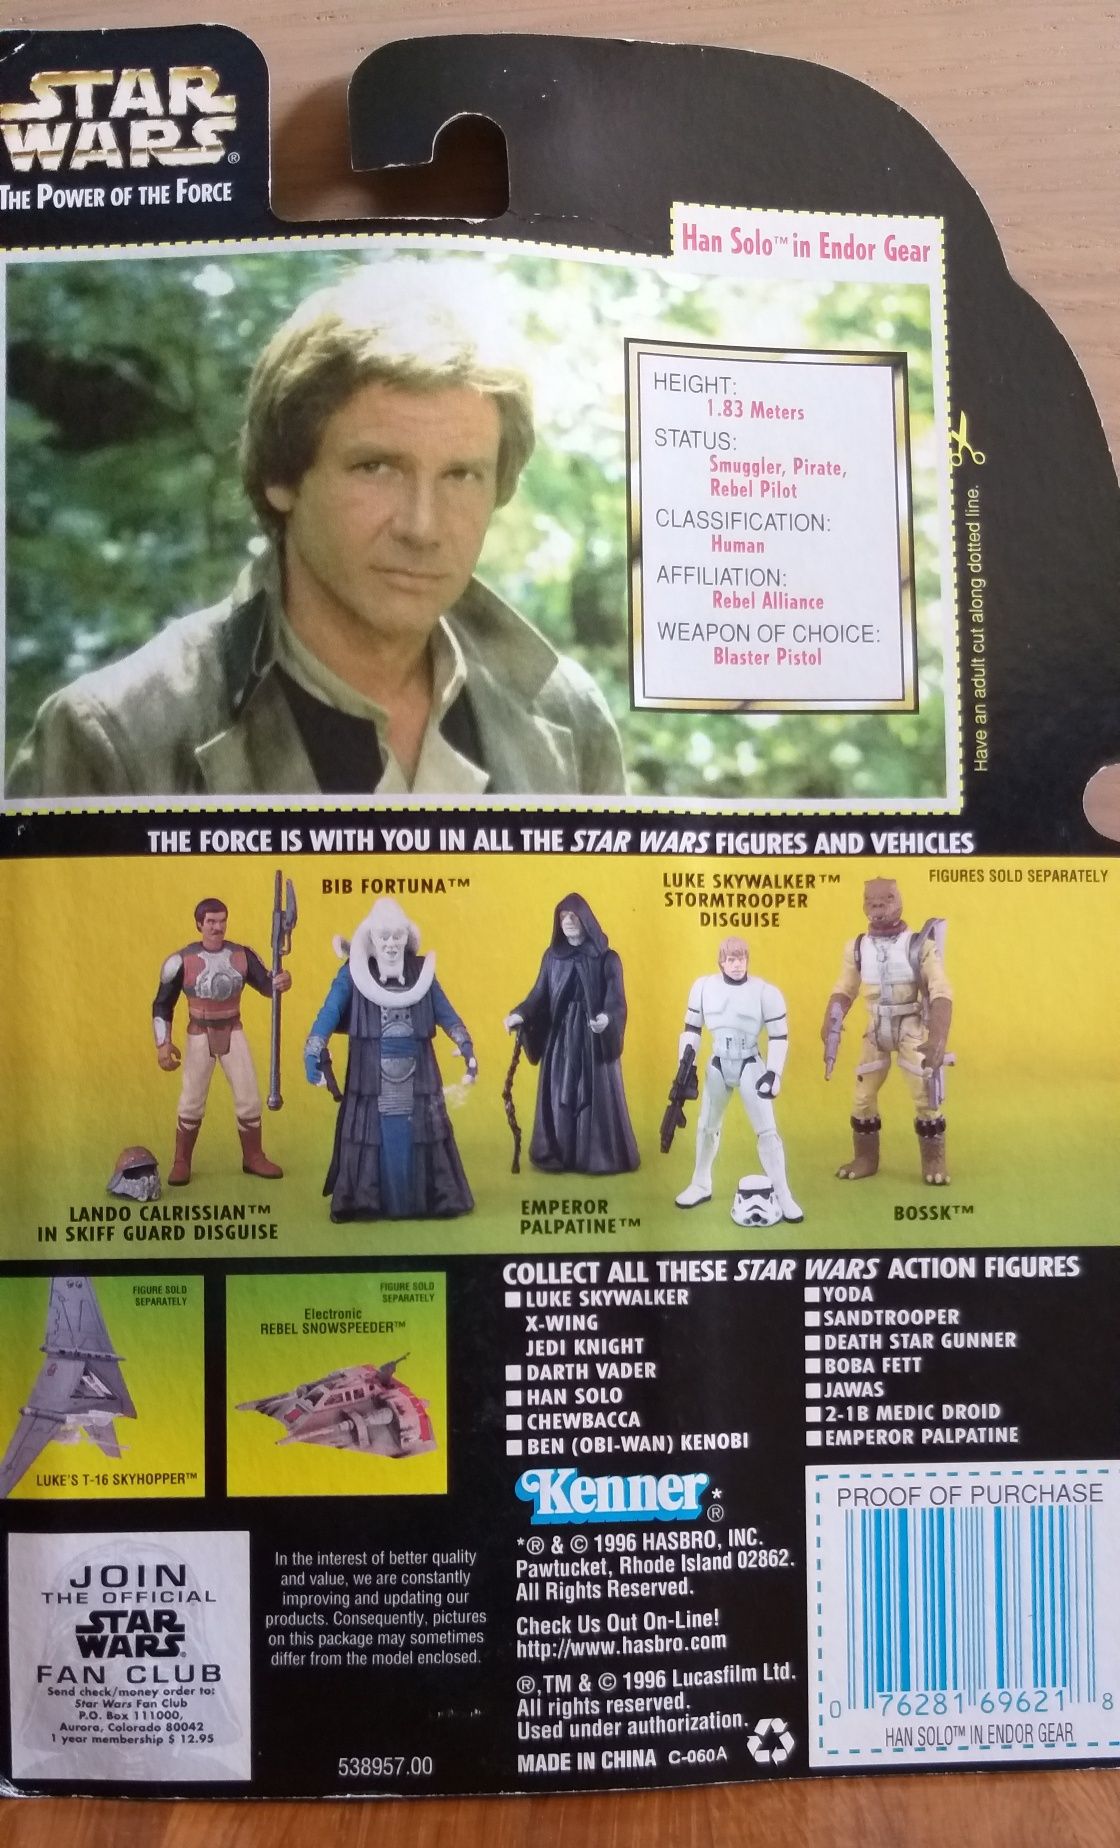 STAR WARS - The Power of the Force - Tonka Kenner Hasbro (anos 90)